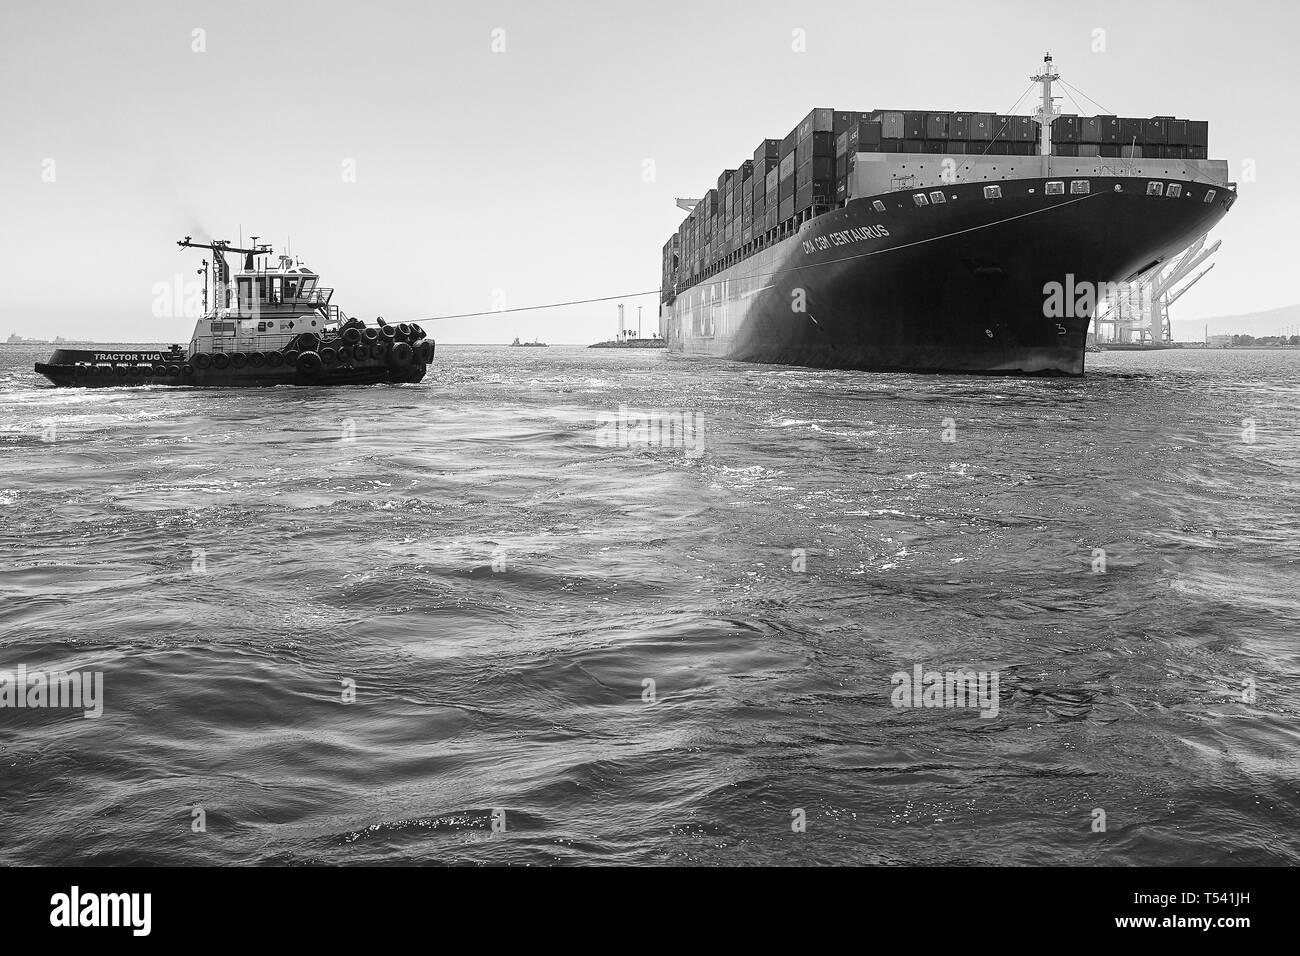 Black And White Photo Of The Container Ship, CMA CGM CENTAURUS, Being Turned Through 180 Degrees By Tug JOHN QUIGG, Before Docking In Long Beach, USA. Stock Photo